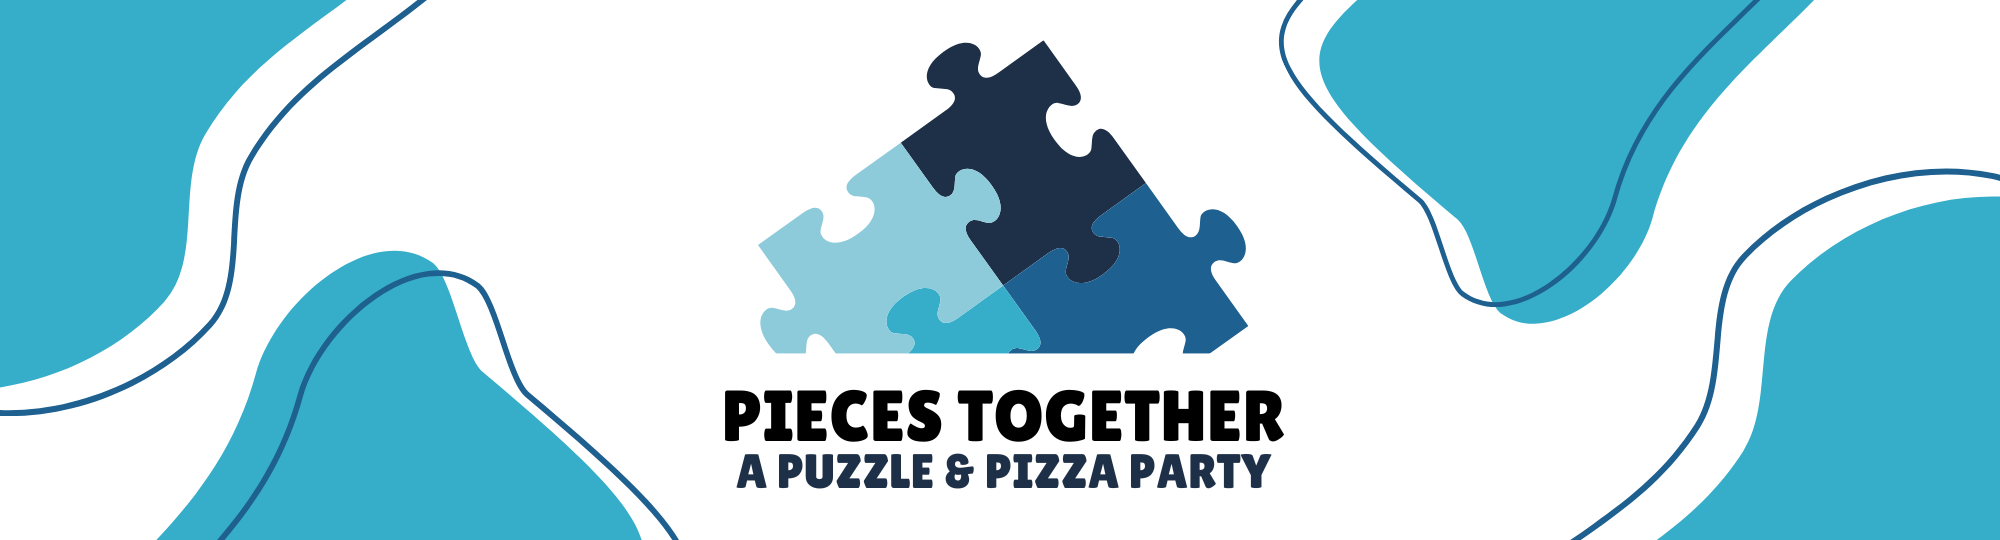 "Pieces Together" Puzzle & Pizza Party Logo